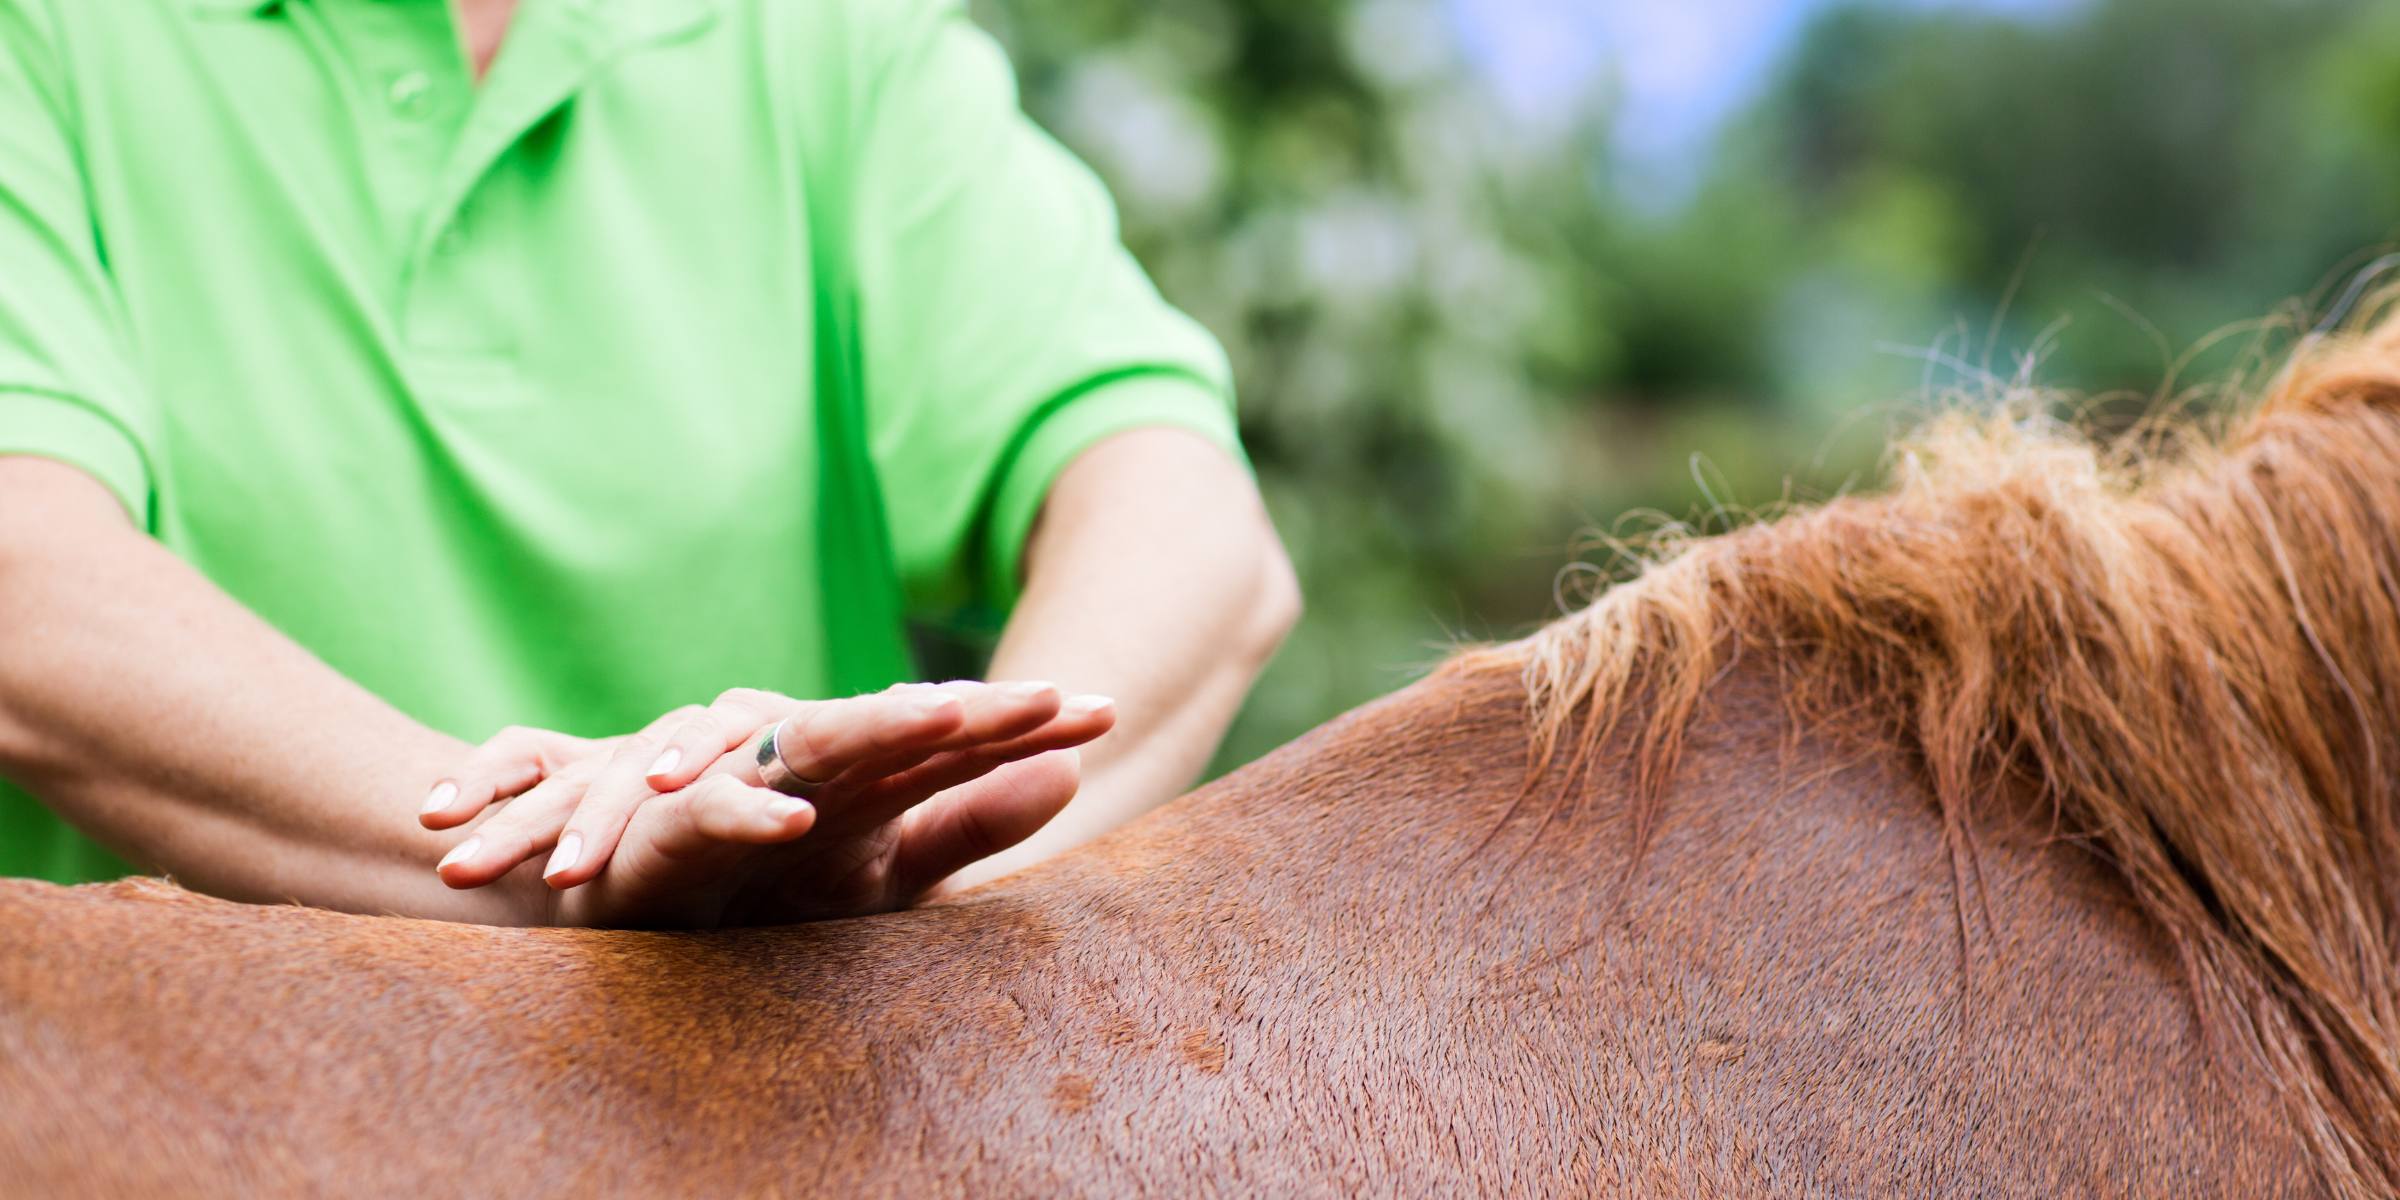 chiropractic care for horses relieves joint pain and back pain